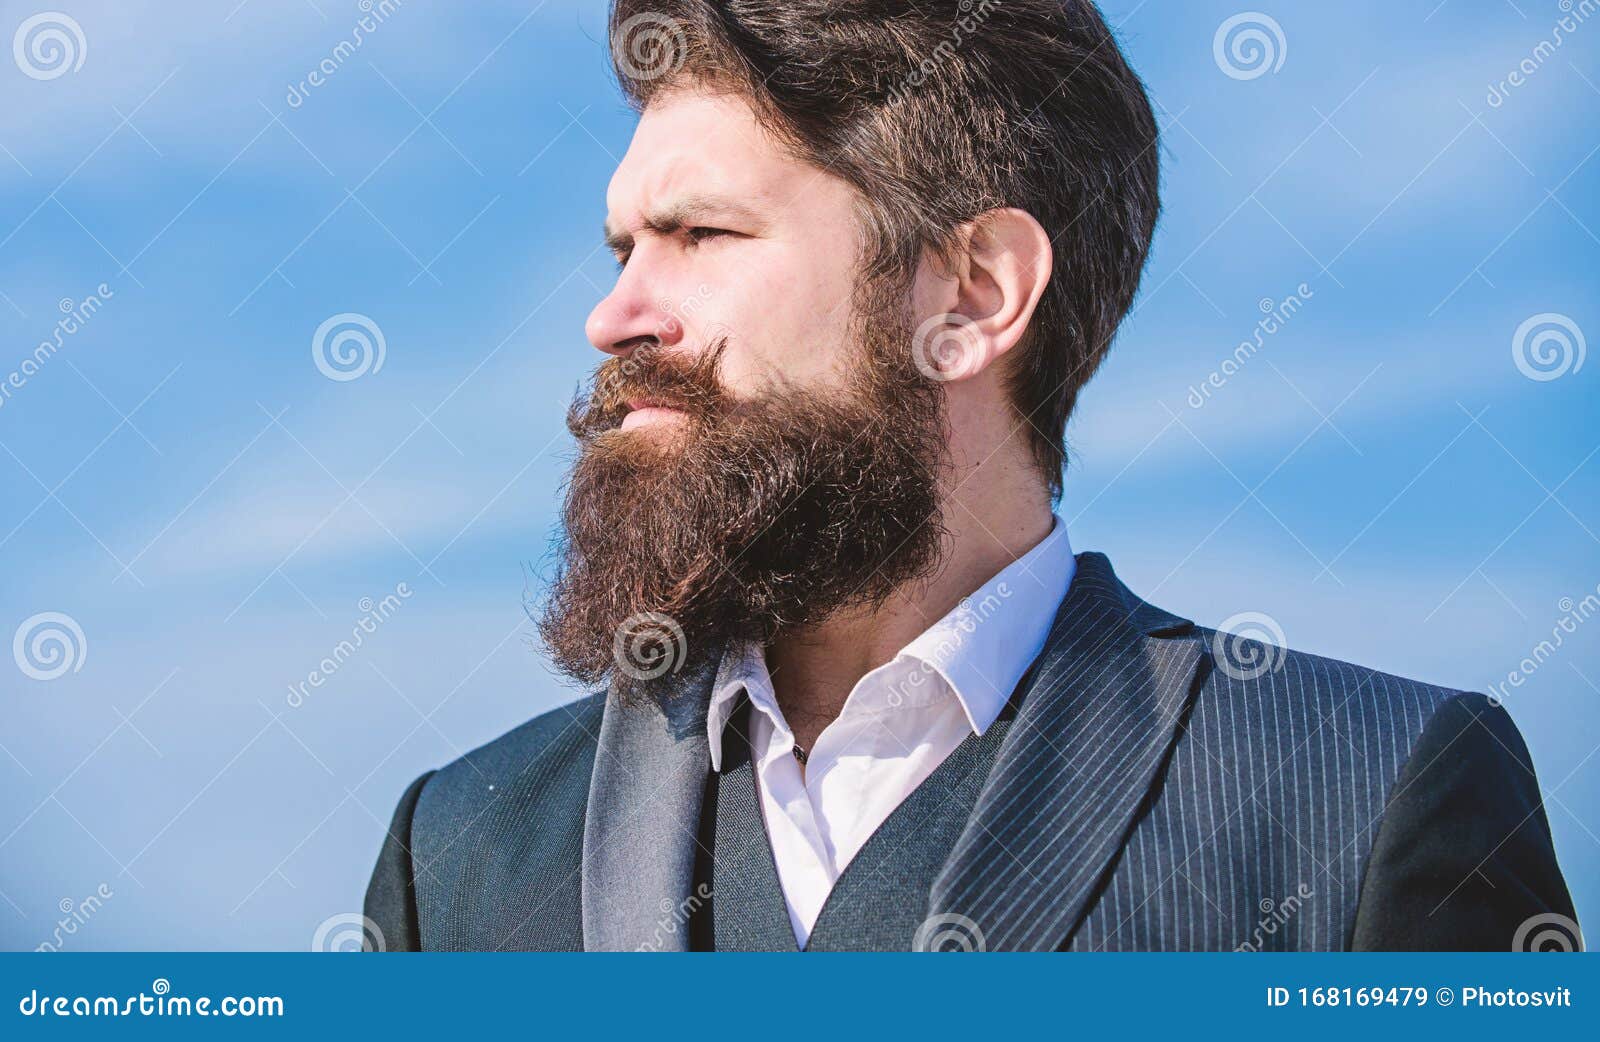 Epic Beard Growing Guide. Vintage Style Long Beard. Facial Hair Beard and  Mustache Care. Beard Fashion Trend Stock Image - Image of face, male:  168169479